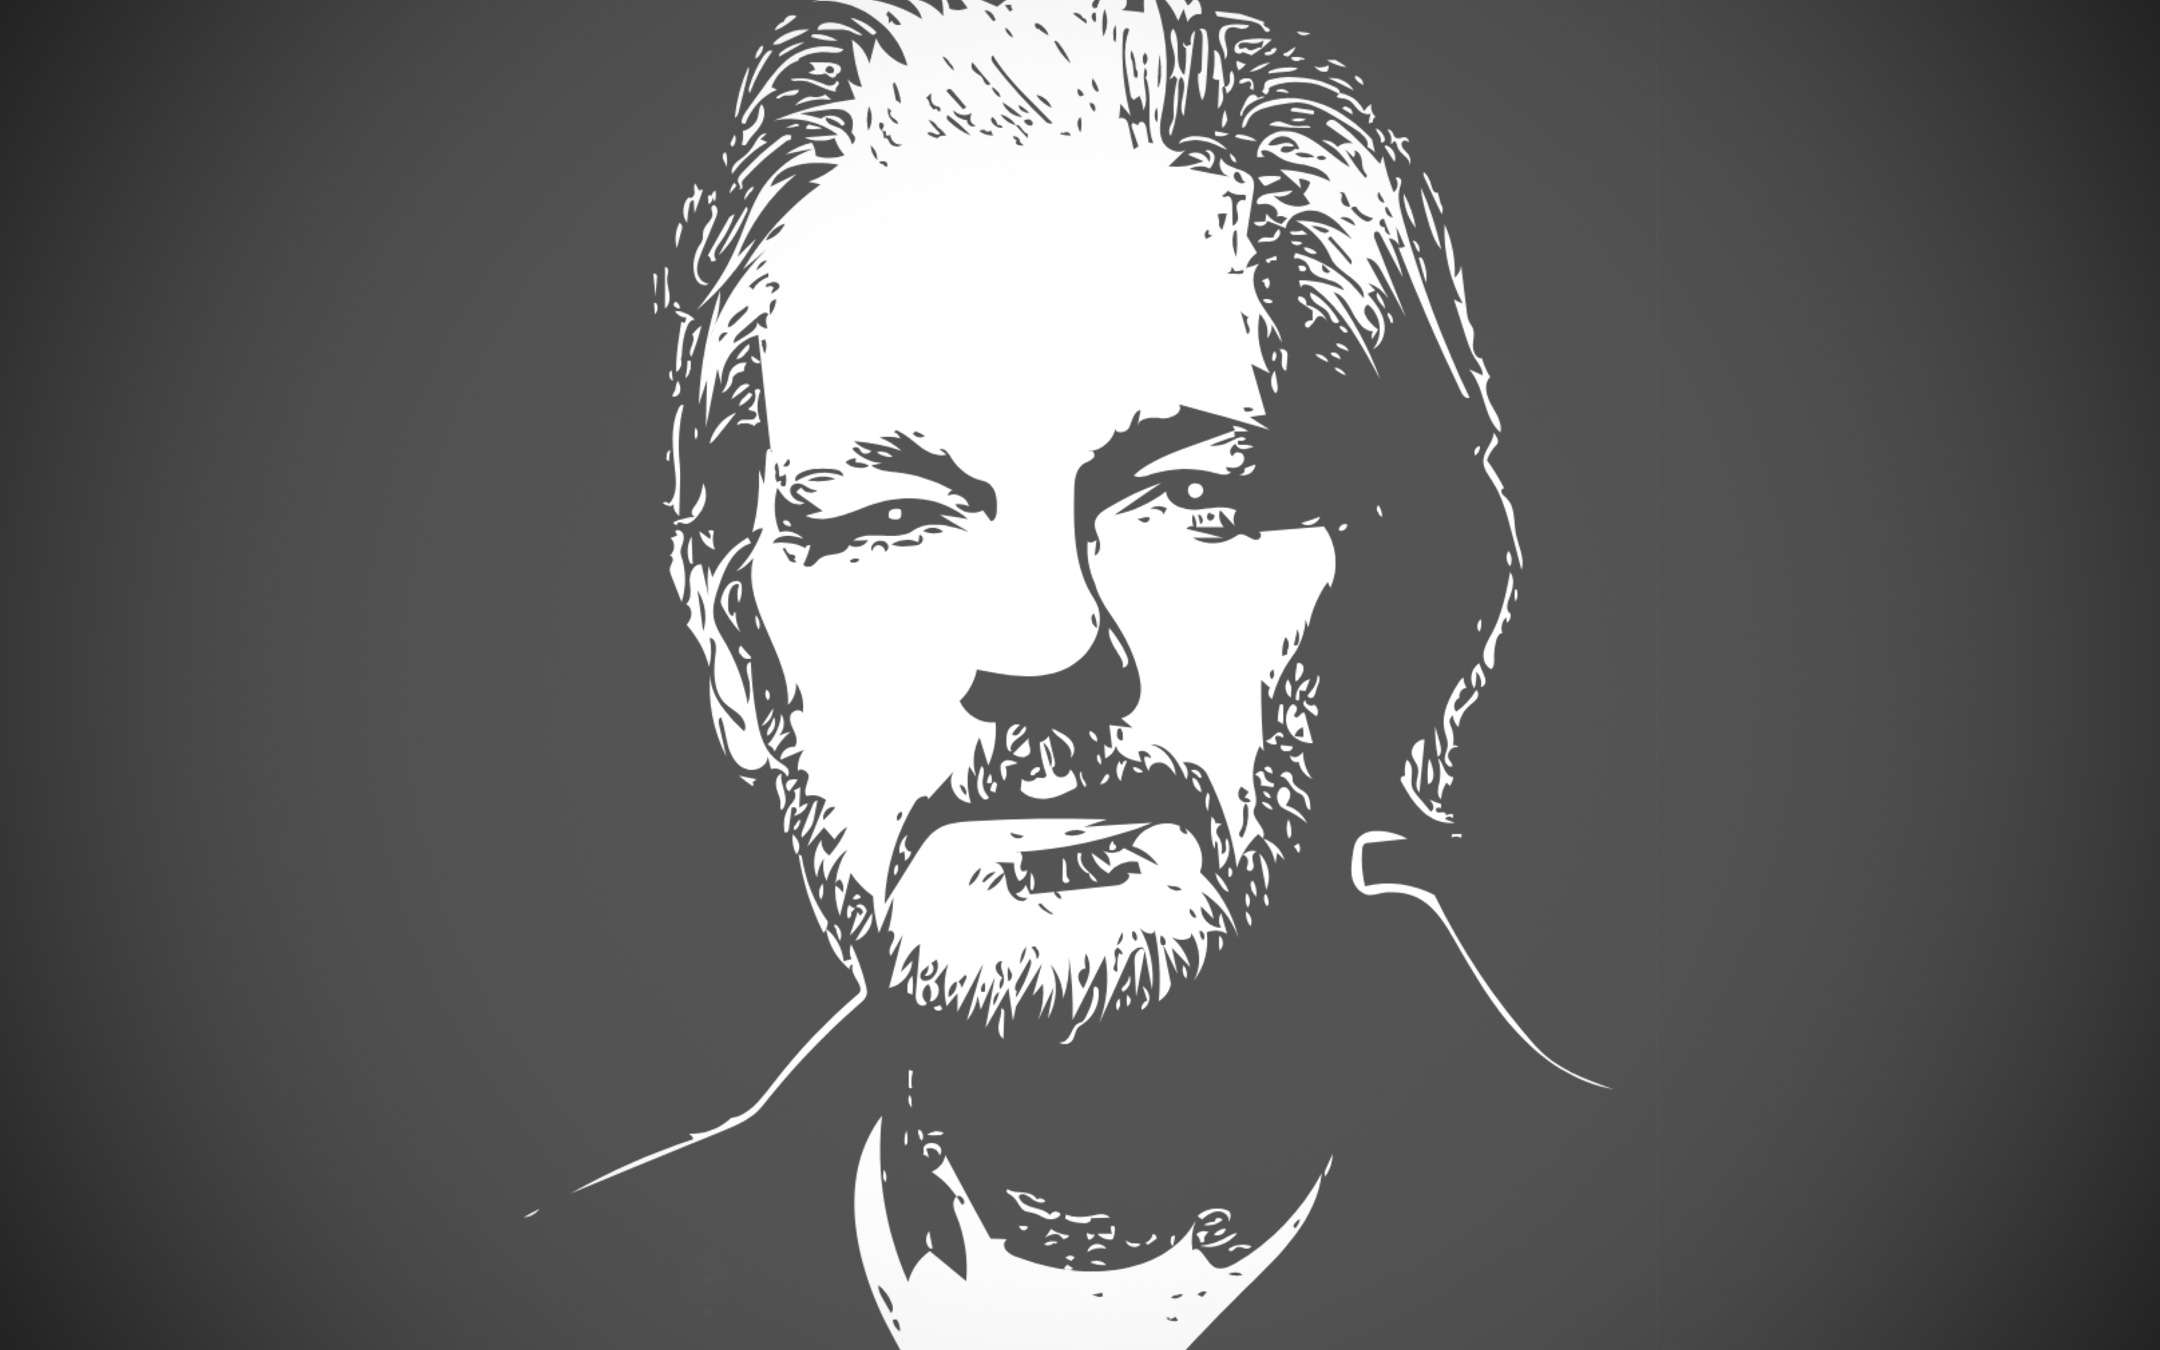 WikiLeaks: new accusations from the USA against Assange